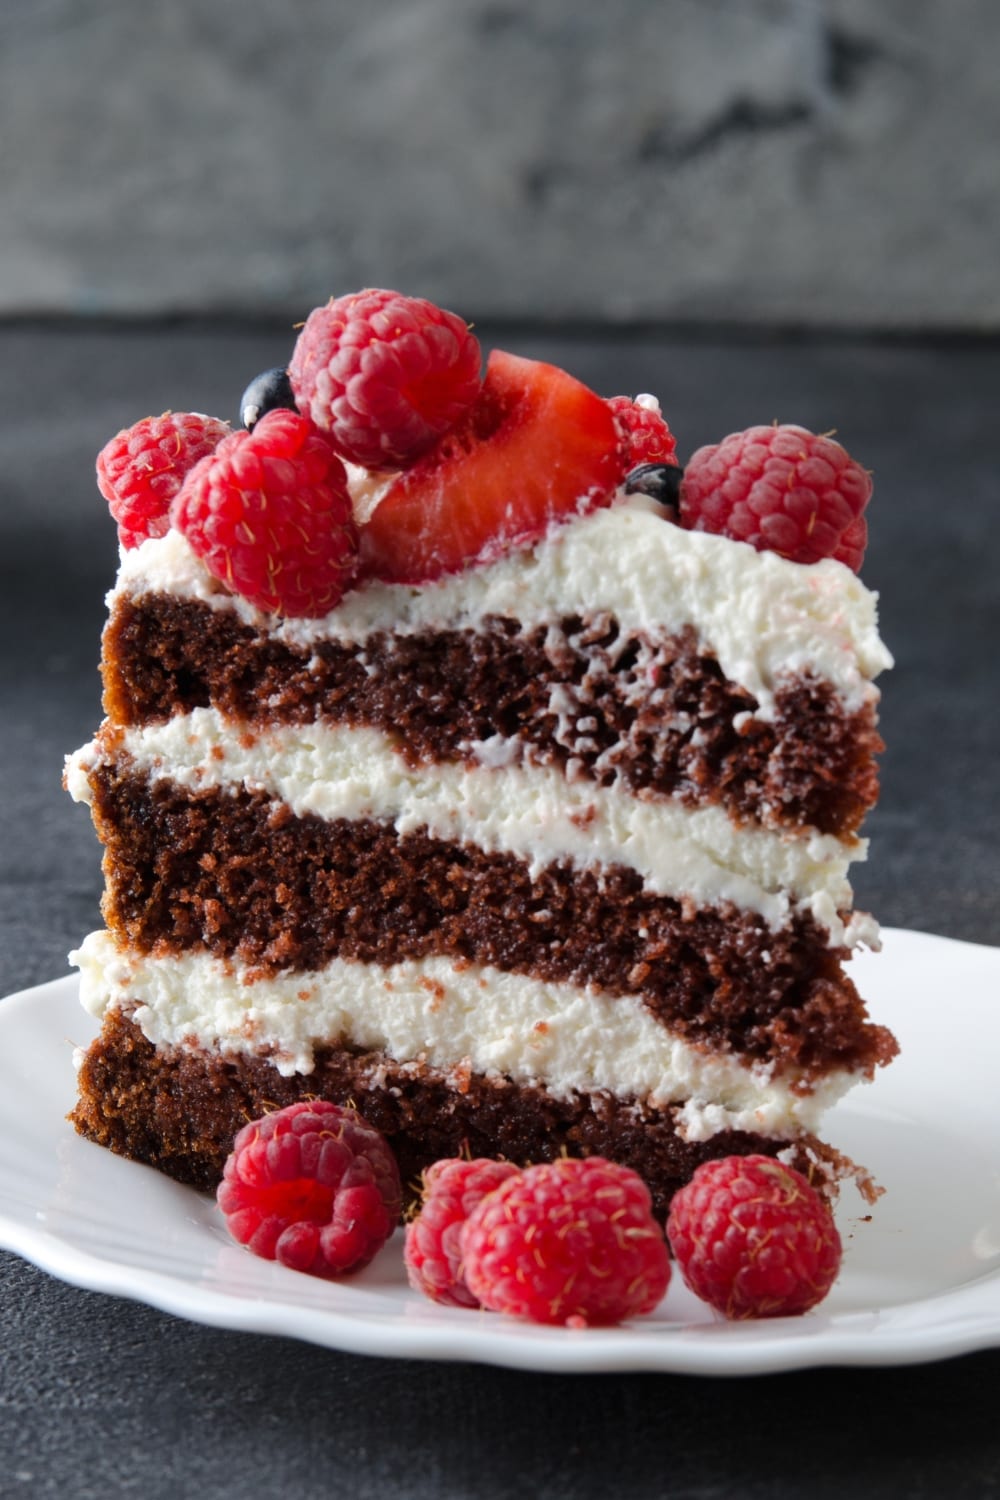 Sliced Layered Naked Chocolate Cake with Cream and Raspberries, Served on a White Plate